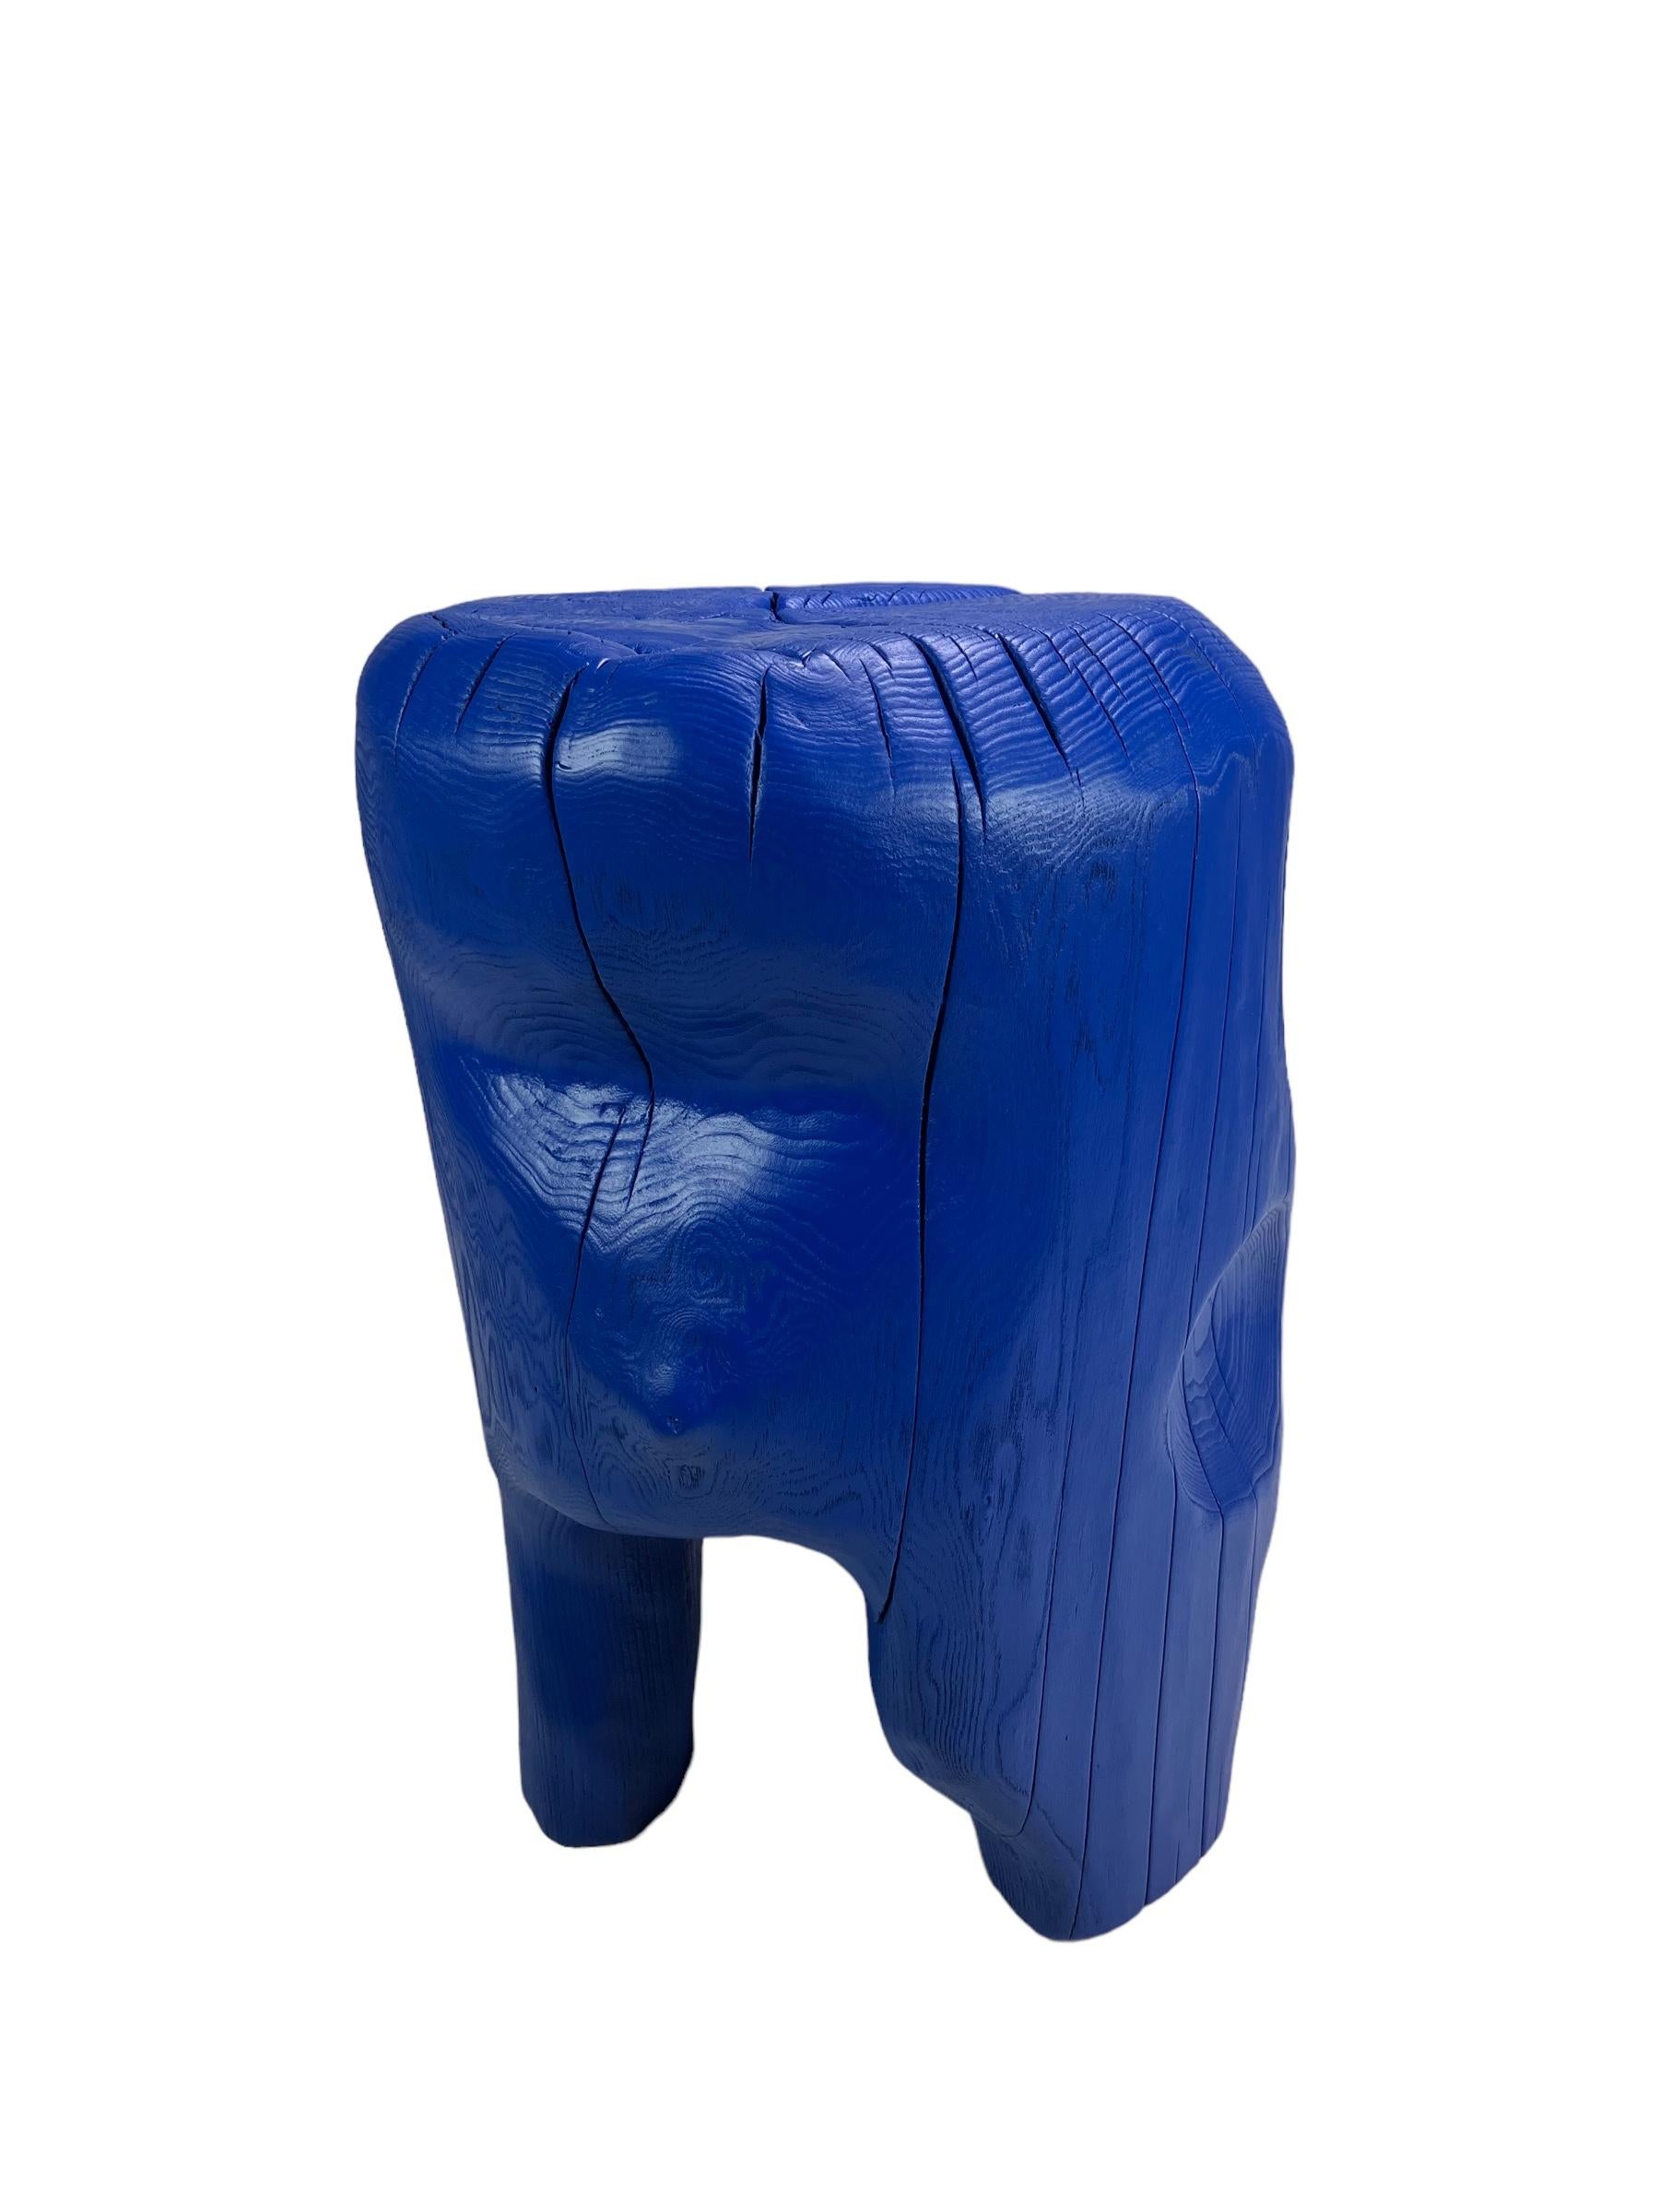 Carved sculptural contemporary wooden stool/table from locally sourced elmwood in Sweden.
Hand carved by master Swedish woodmaker ELAKFORM.
Painted with a durable acrylic-based colour and finished with an acrylic topcoat.
ELAKFORM work with